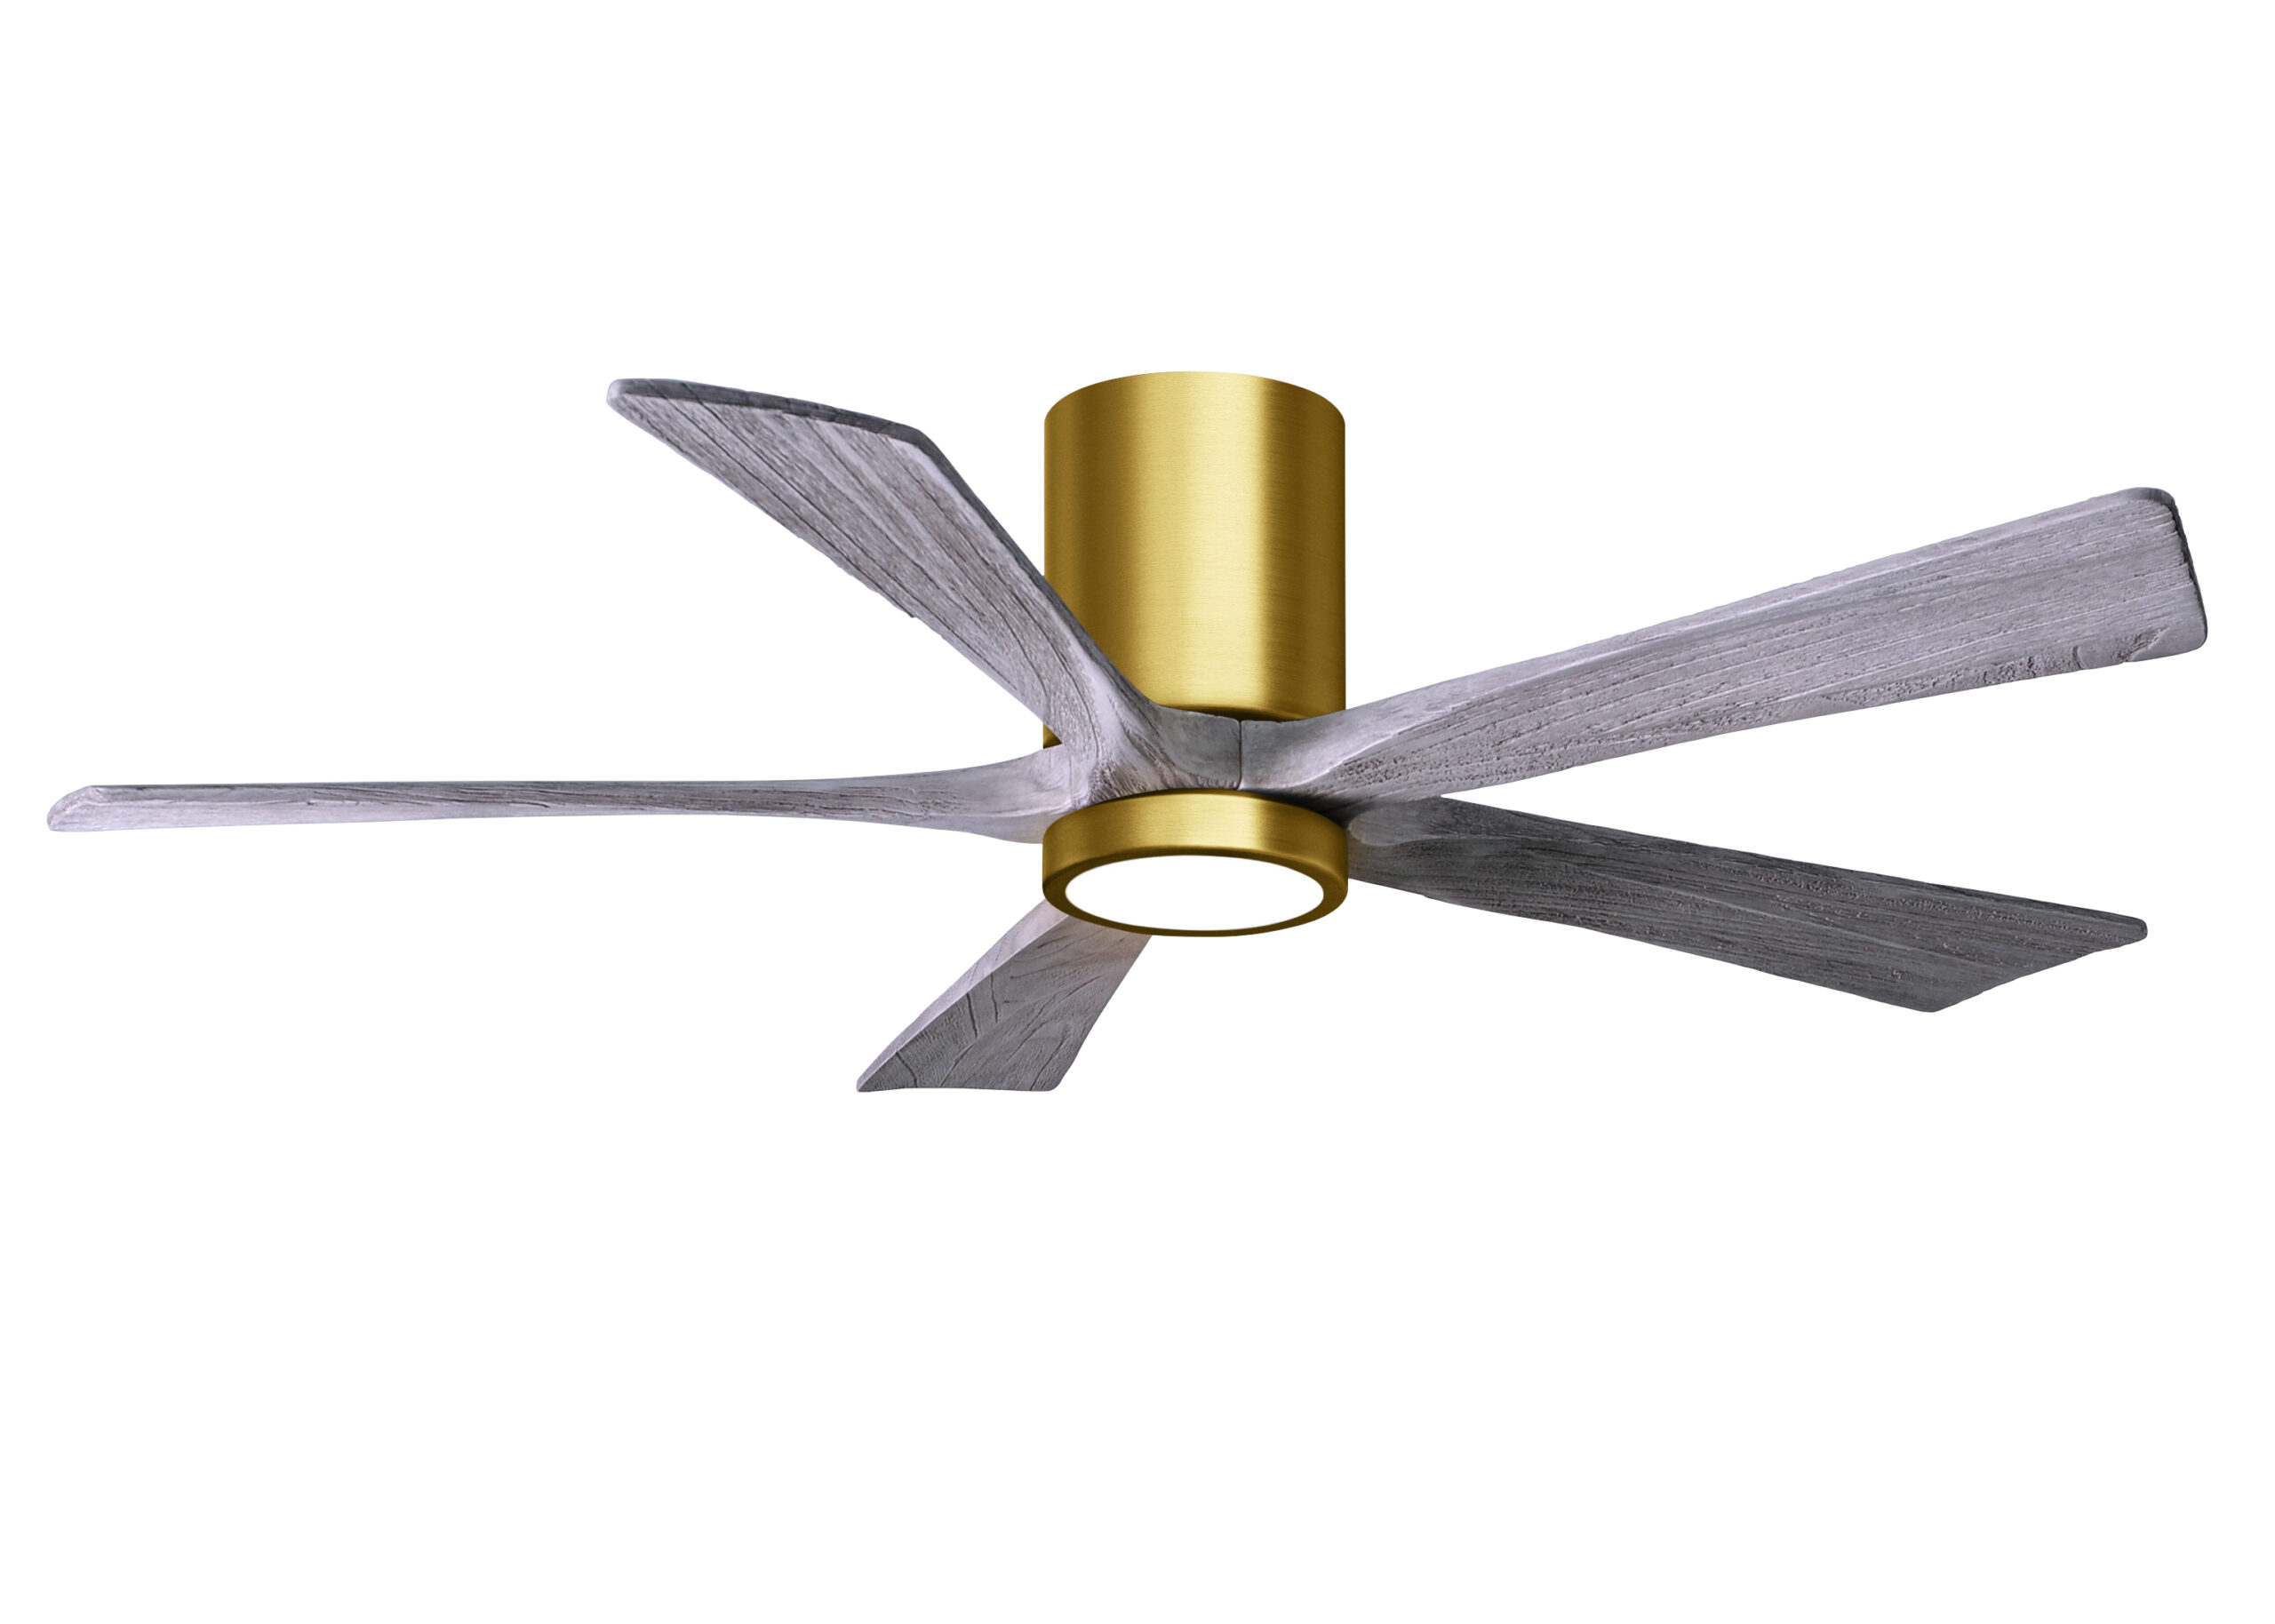 Irene-5HLK Ceiling Fan in Brushed Brass Finish with 52